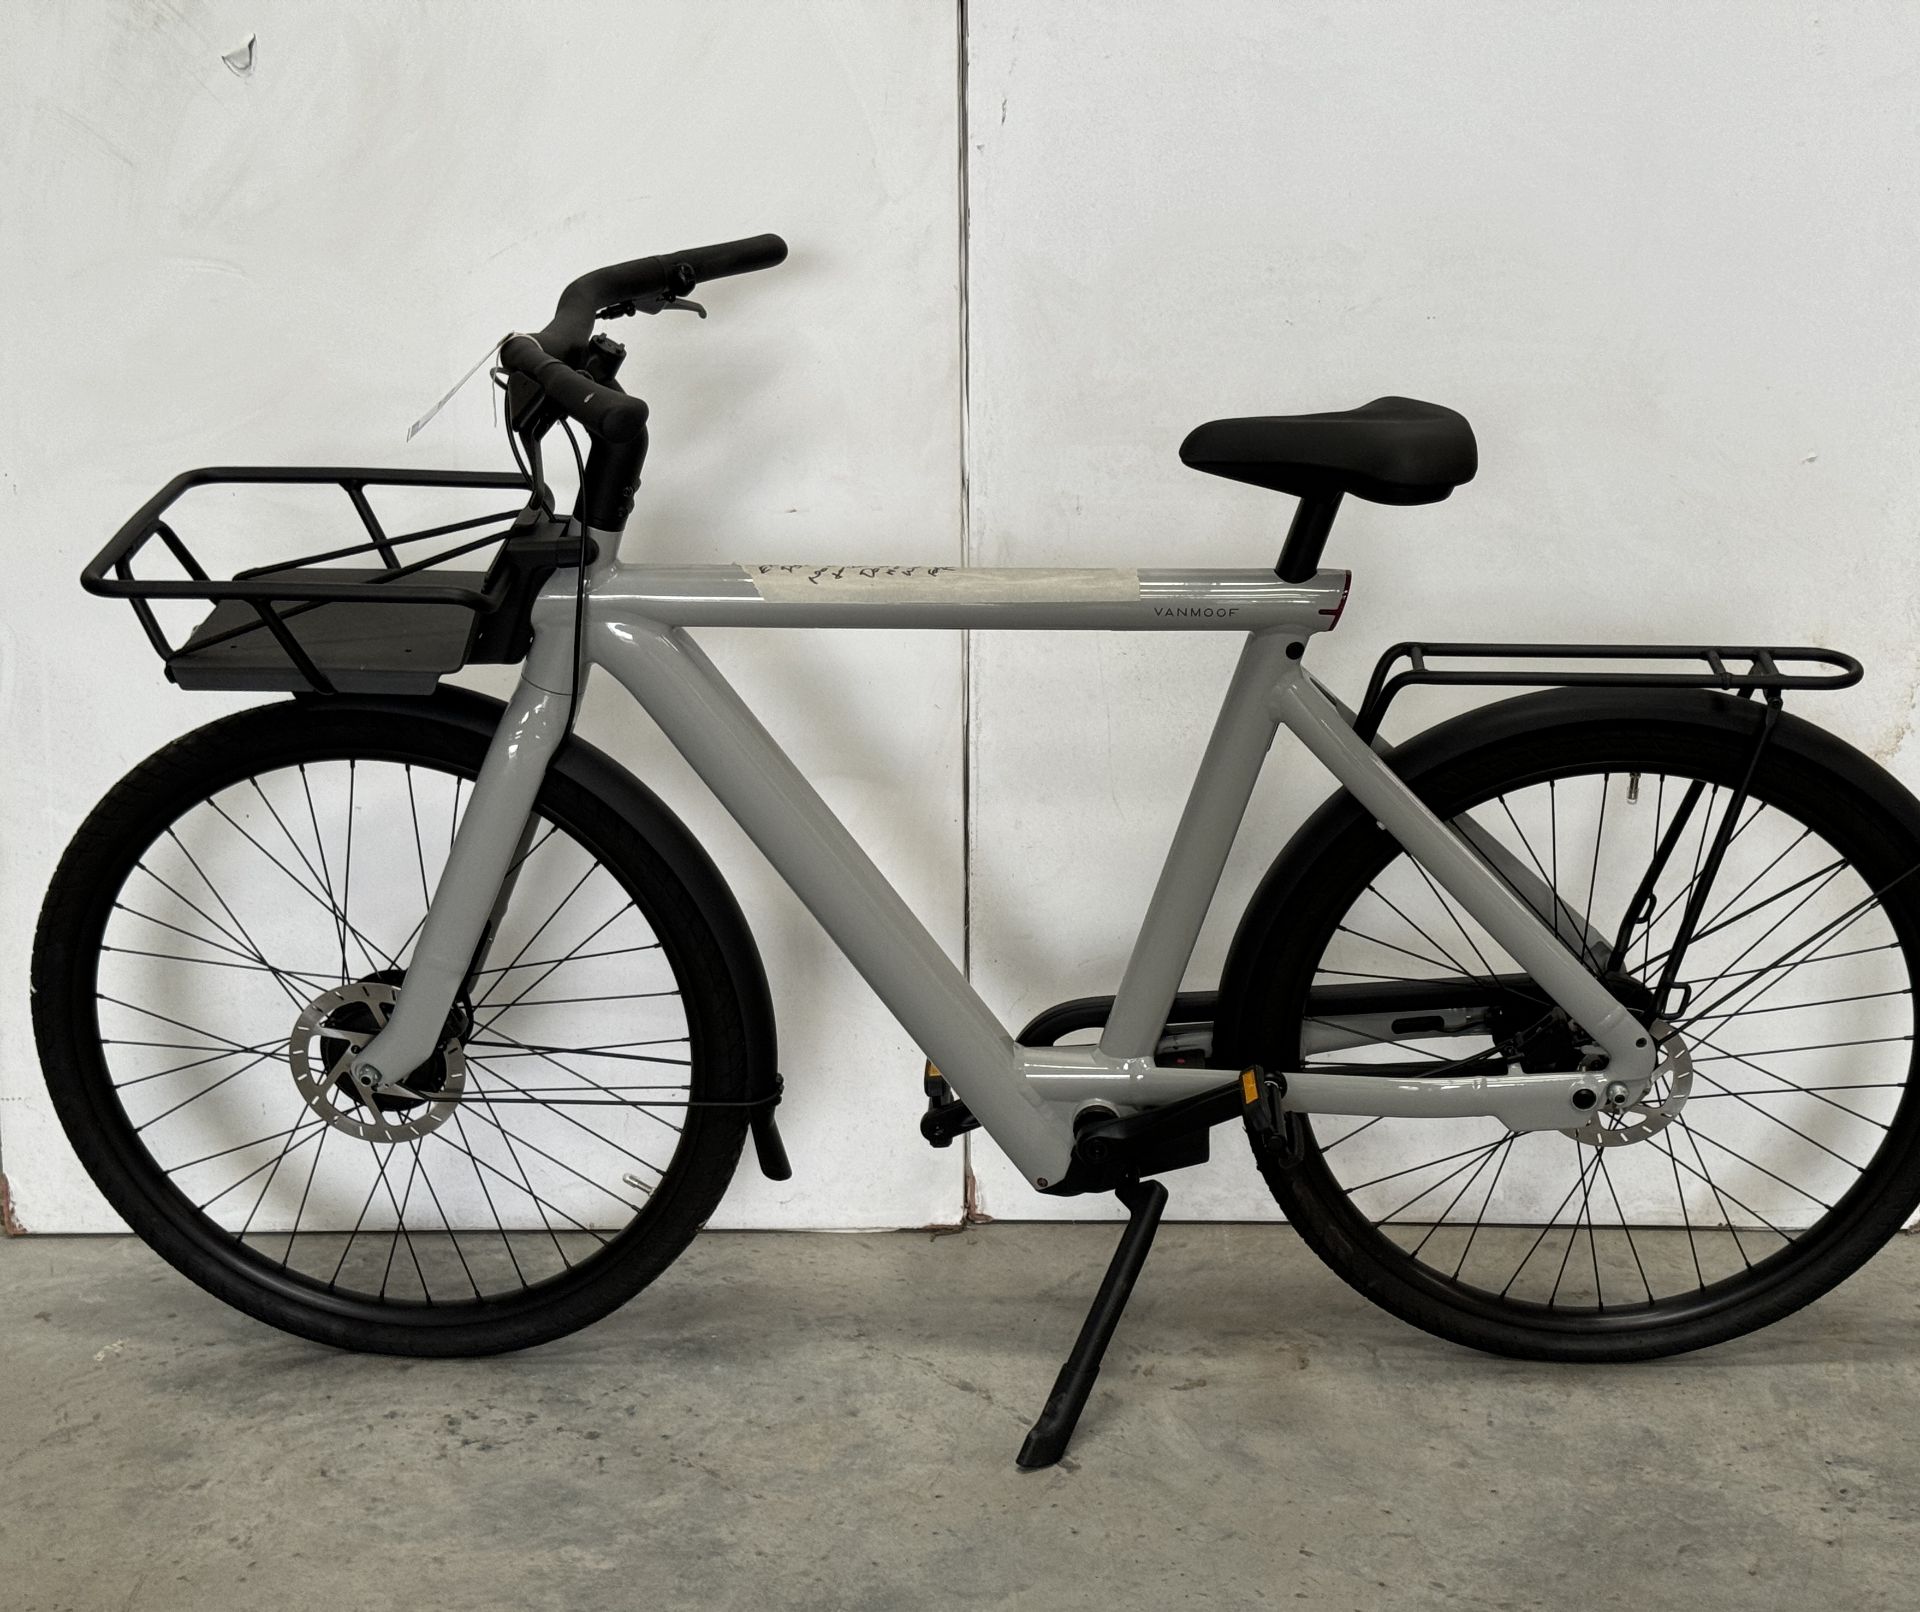 VanMoof S5 Electric Bike, Frame Number SVTBGE000030A (NOT ROADWORTHY - FOR SPARES ONLY) (No codes